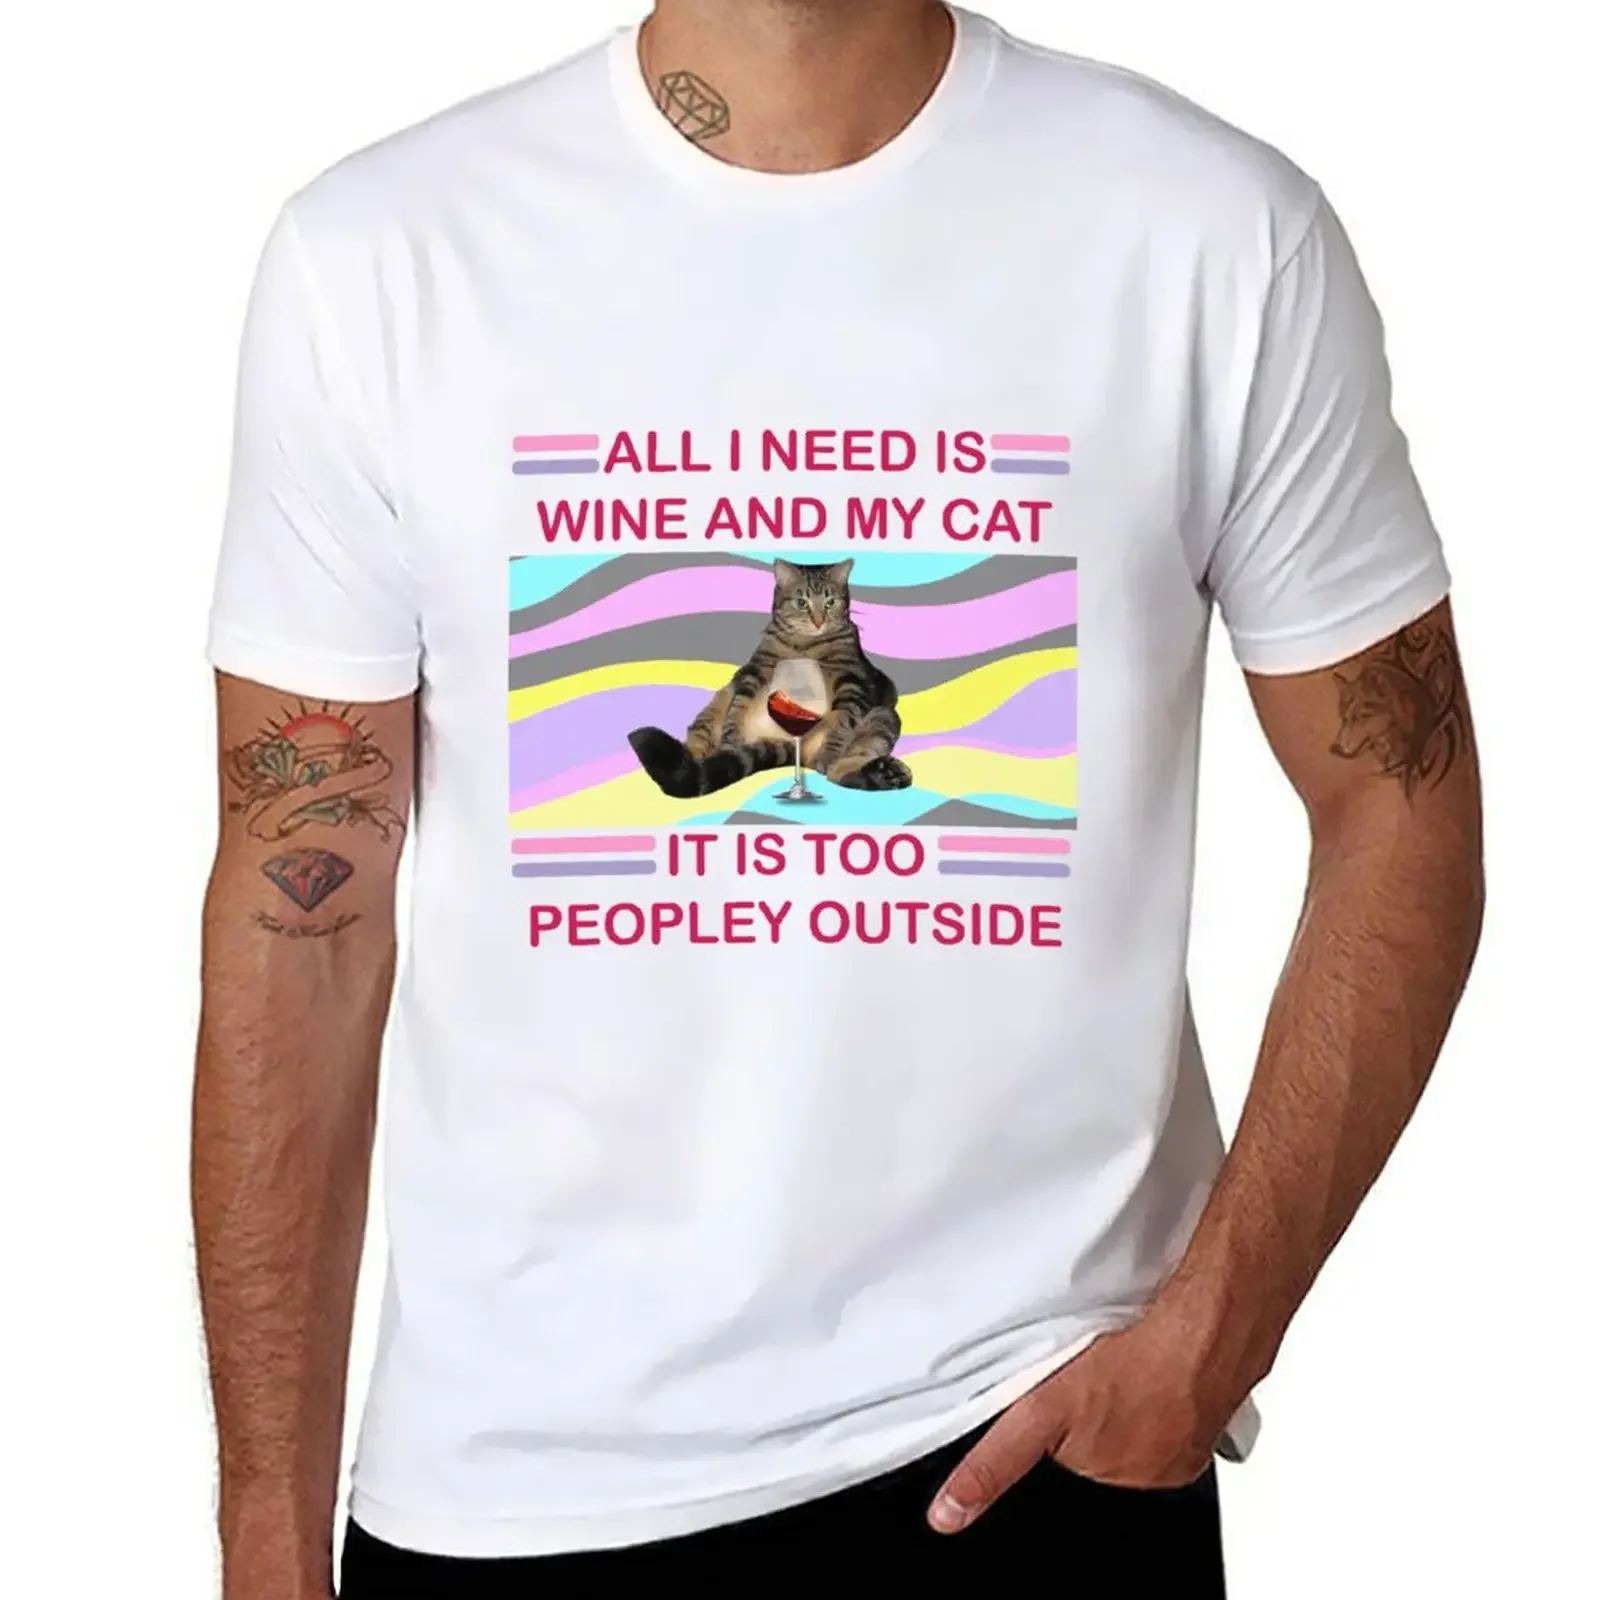 

All I need is wine and my cat It is too peopley outside T-Shirt aesthetic clothes hippie clothes Short sleeve tee men